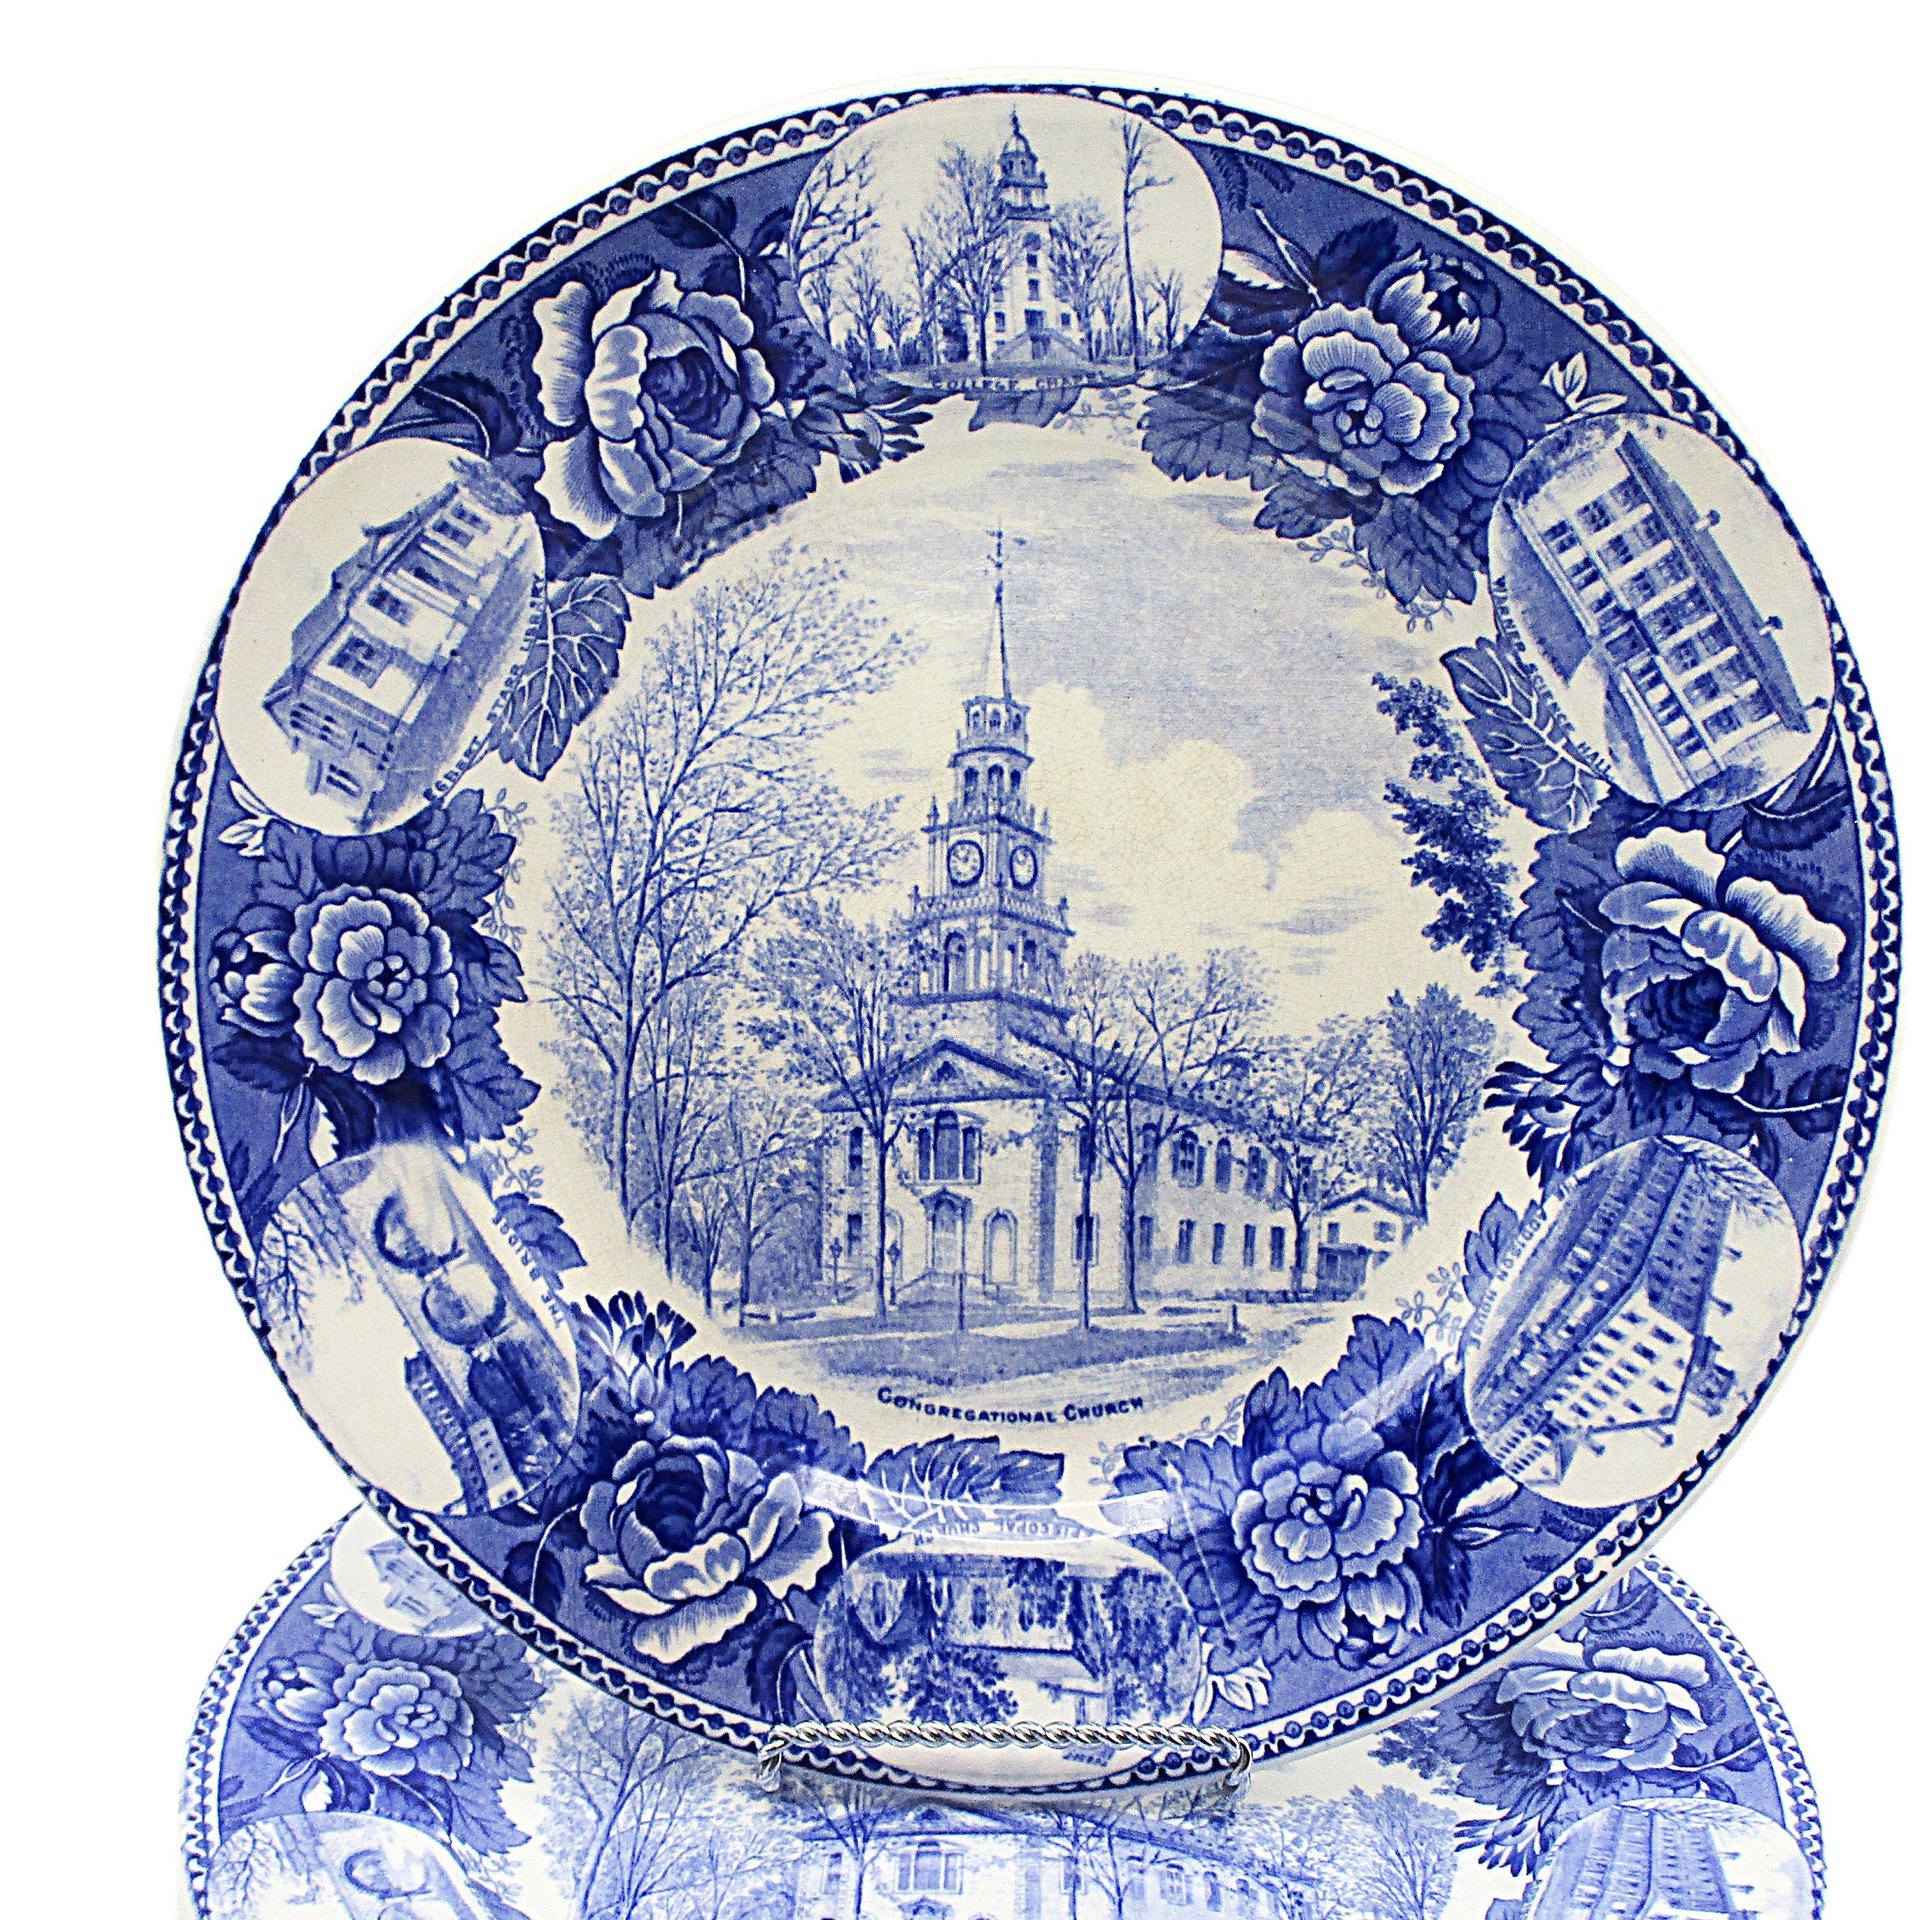 Wedgwood Congregational Church Dinner Plates Set of 6, Blue White Plates, Florals and Historical Buildings